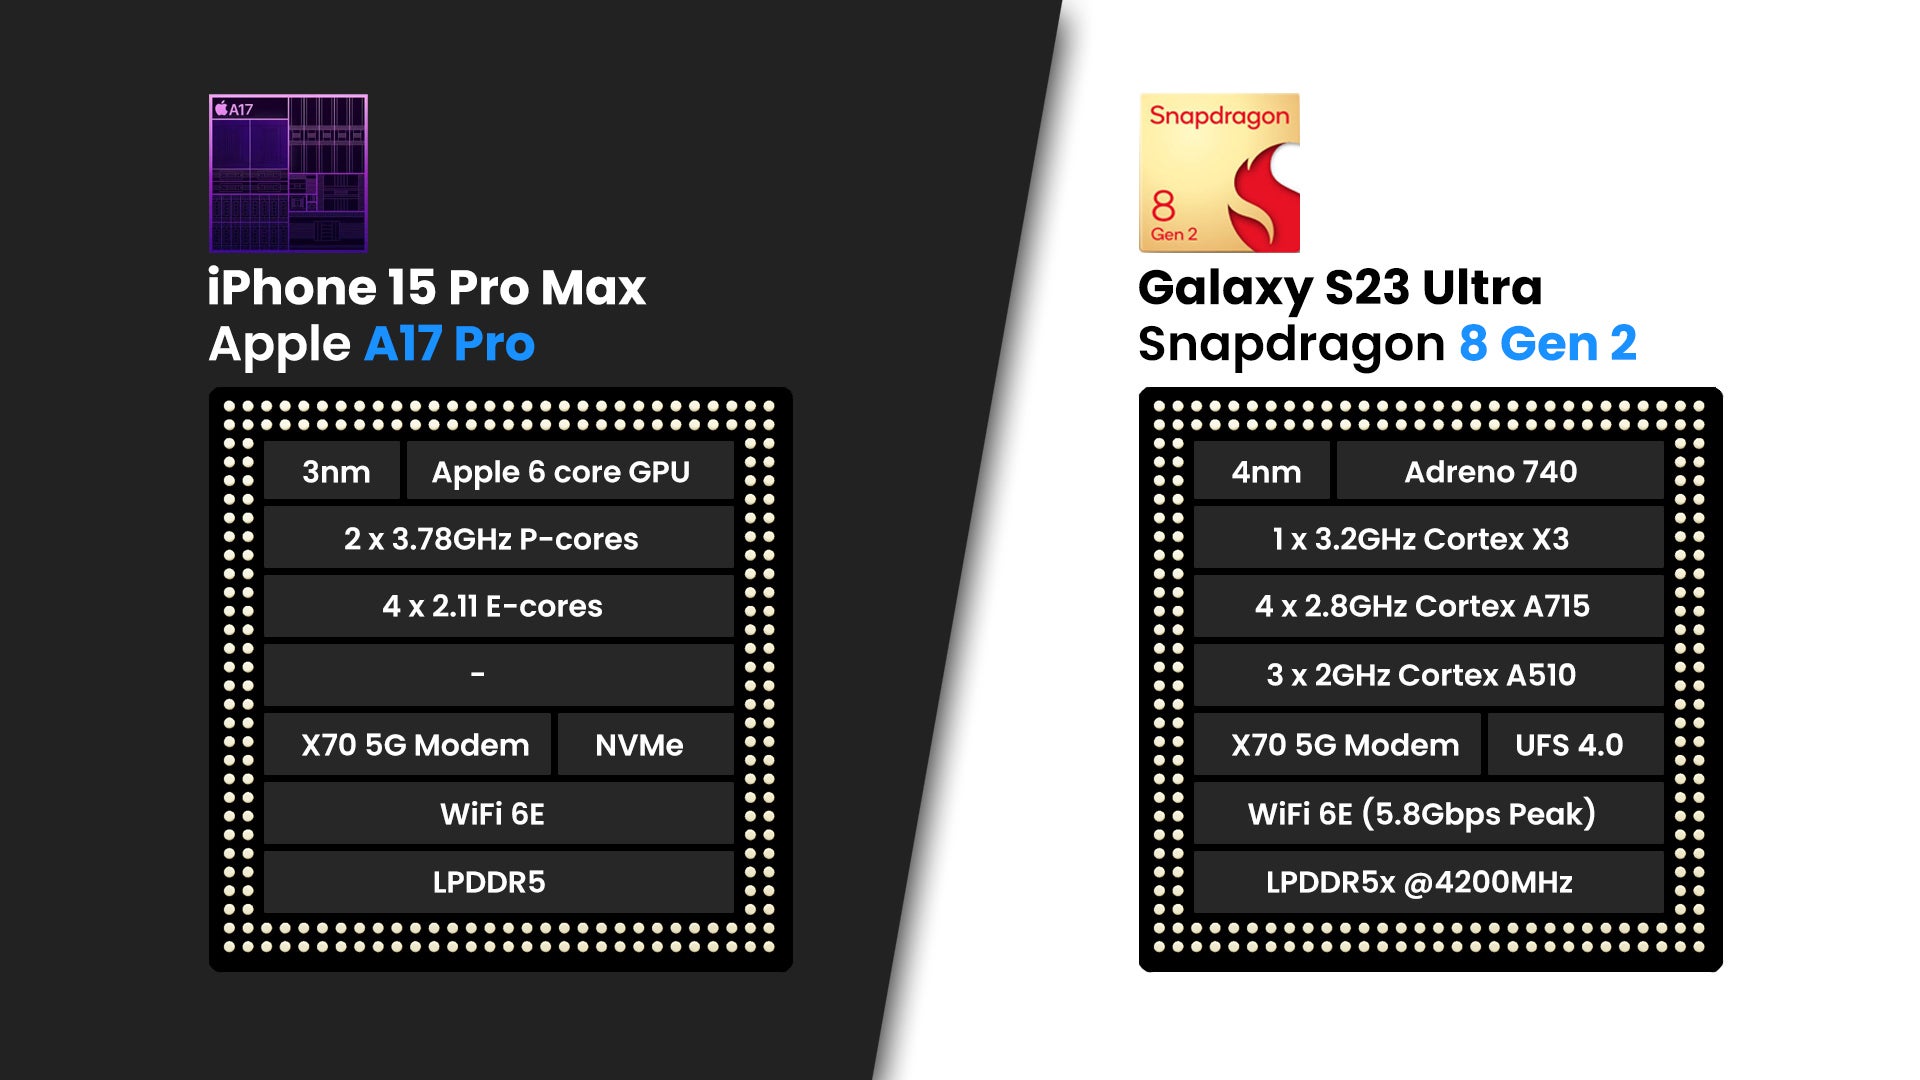 iPhone 15 Pro vs. Galaxy S23 Ultra: which phone is best?